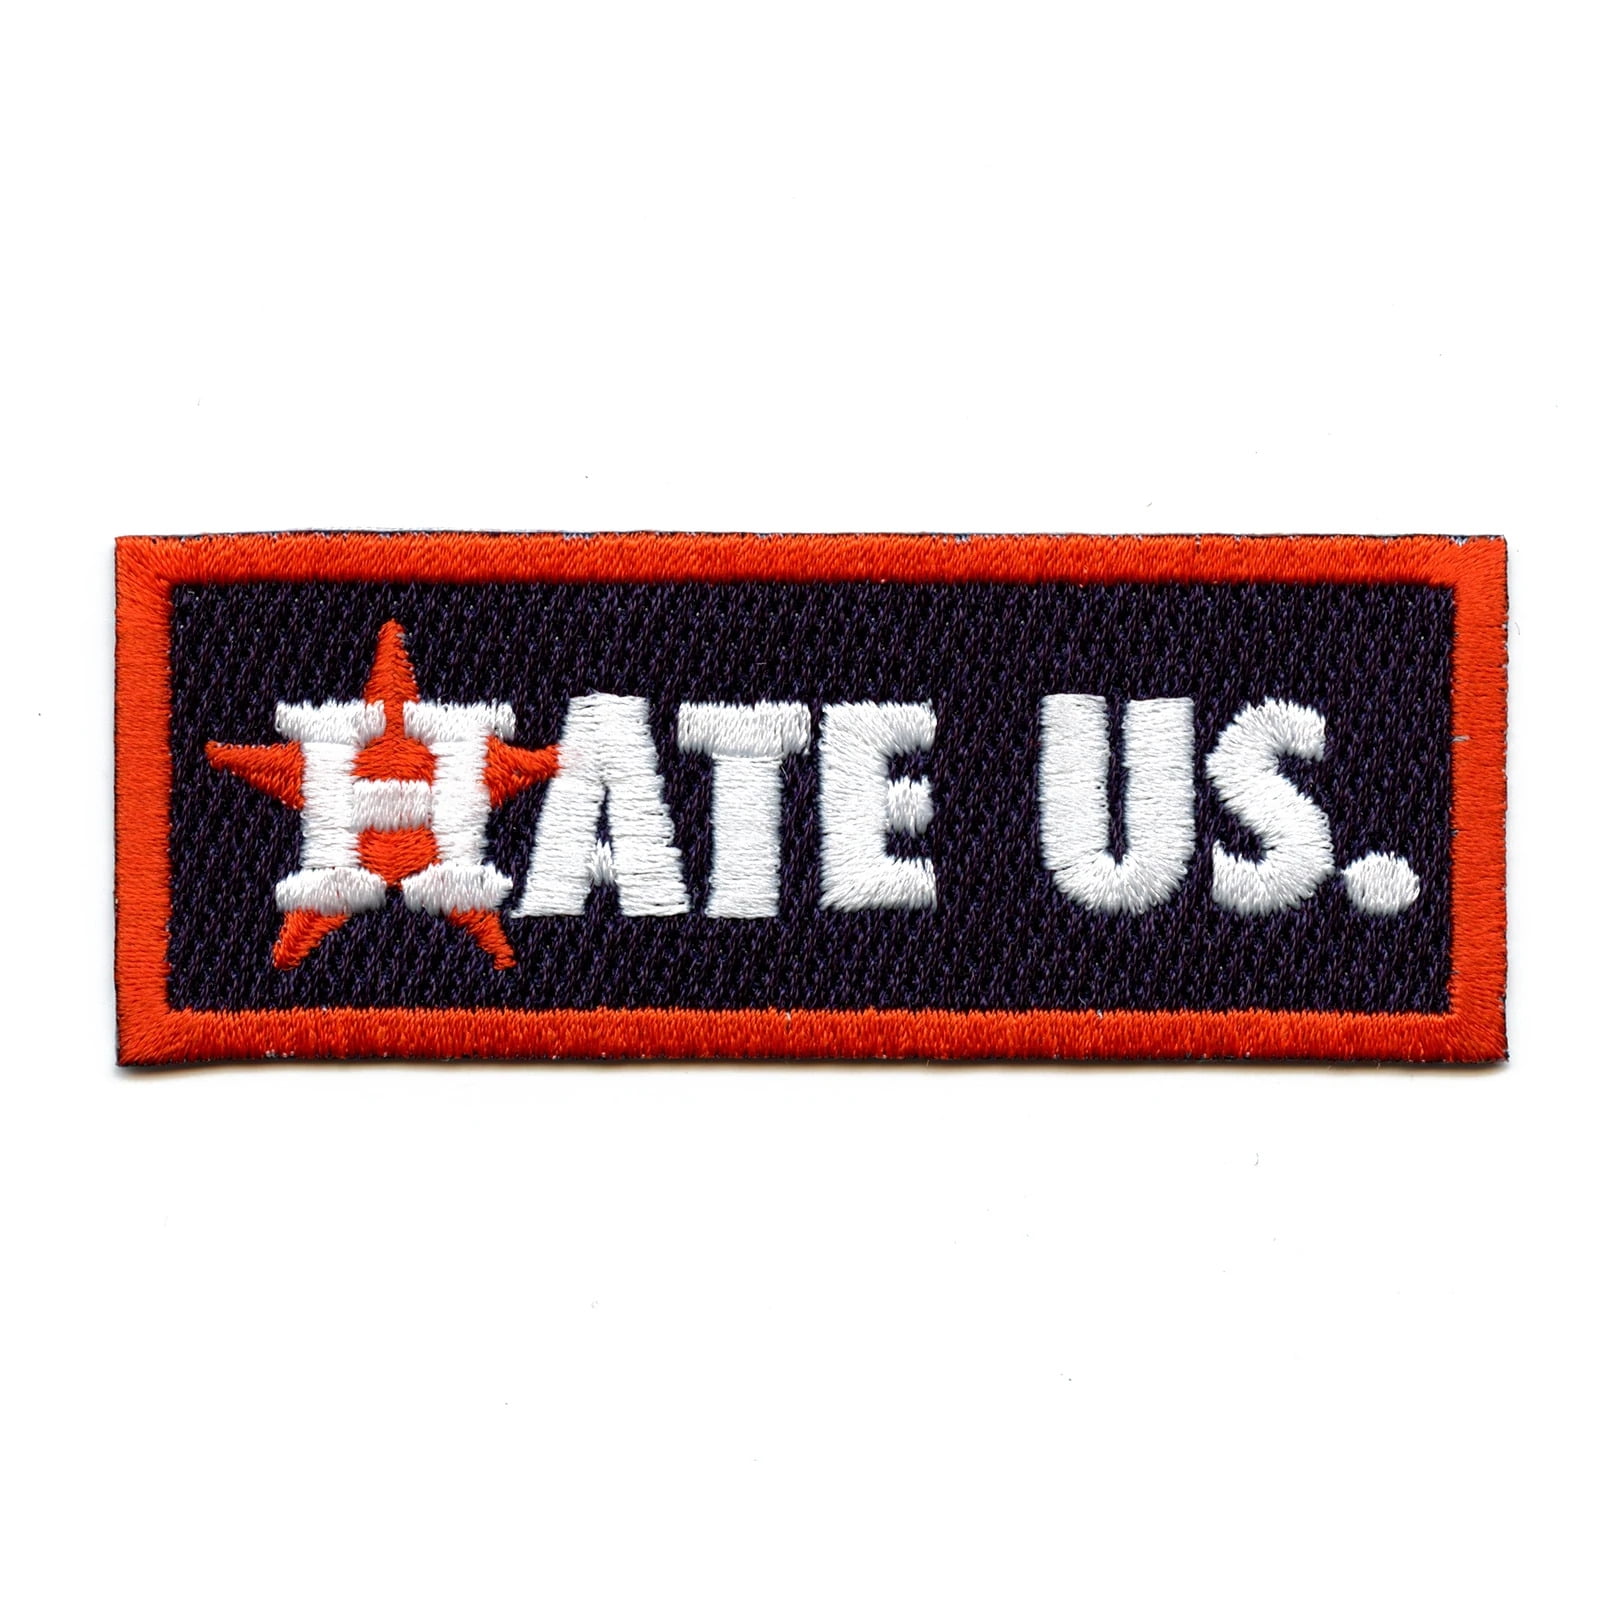 H-Town Hate US. Houston Texas Baseball Parody Embroidered Iron on Patch